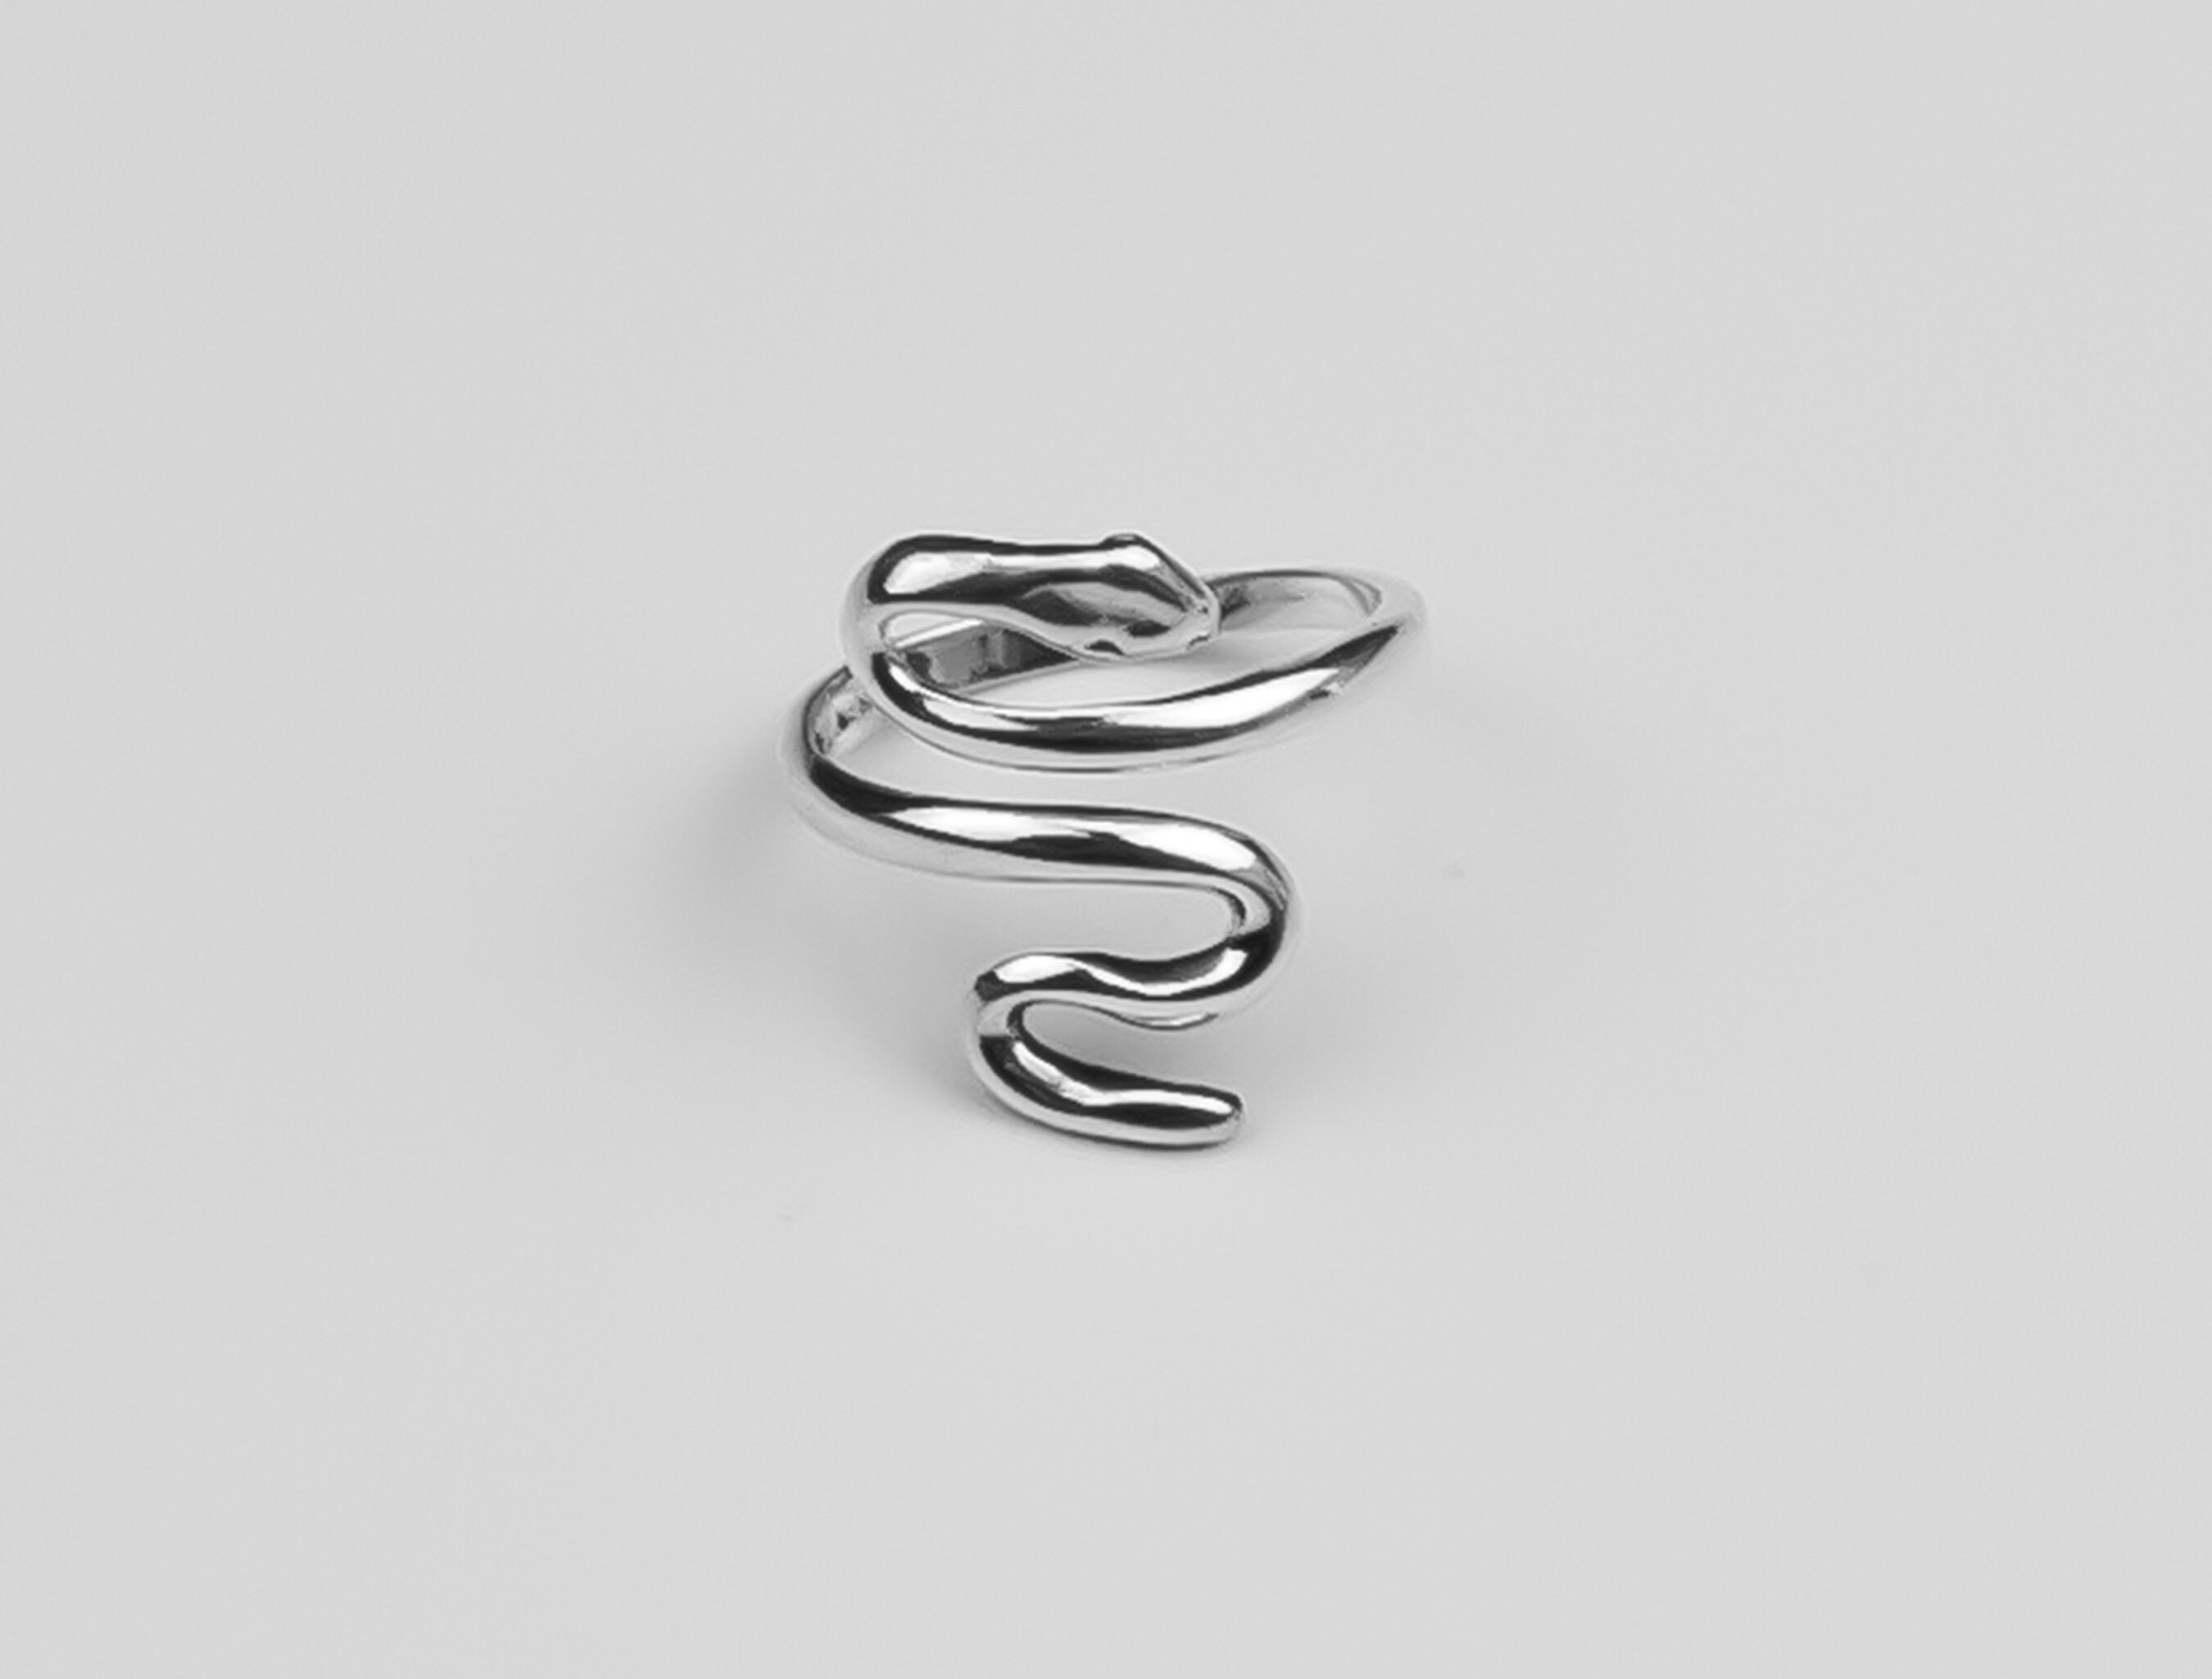 Silver 925 Snake Ring, Boho Silver Ring, Adjustable Silver Ring, Best Gift for Women, Sterling Silver Ring, Silver Animal Ring